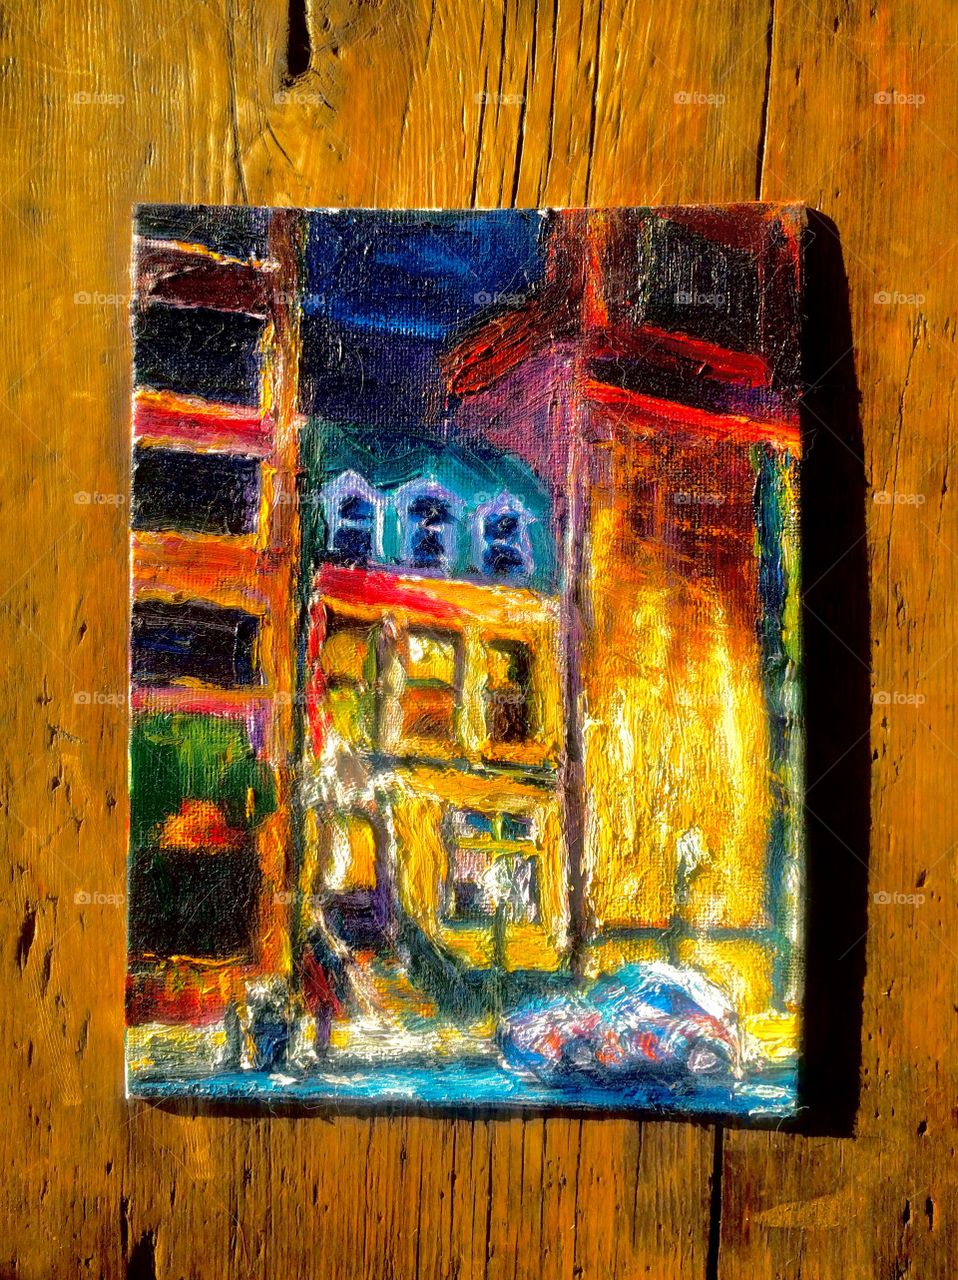 Central Park West at night oil sketch remix 